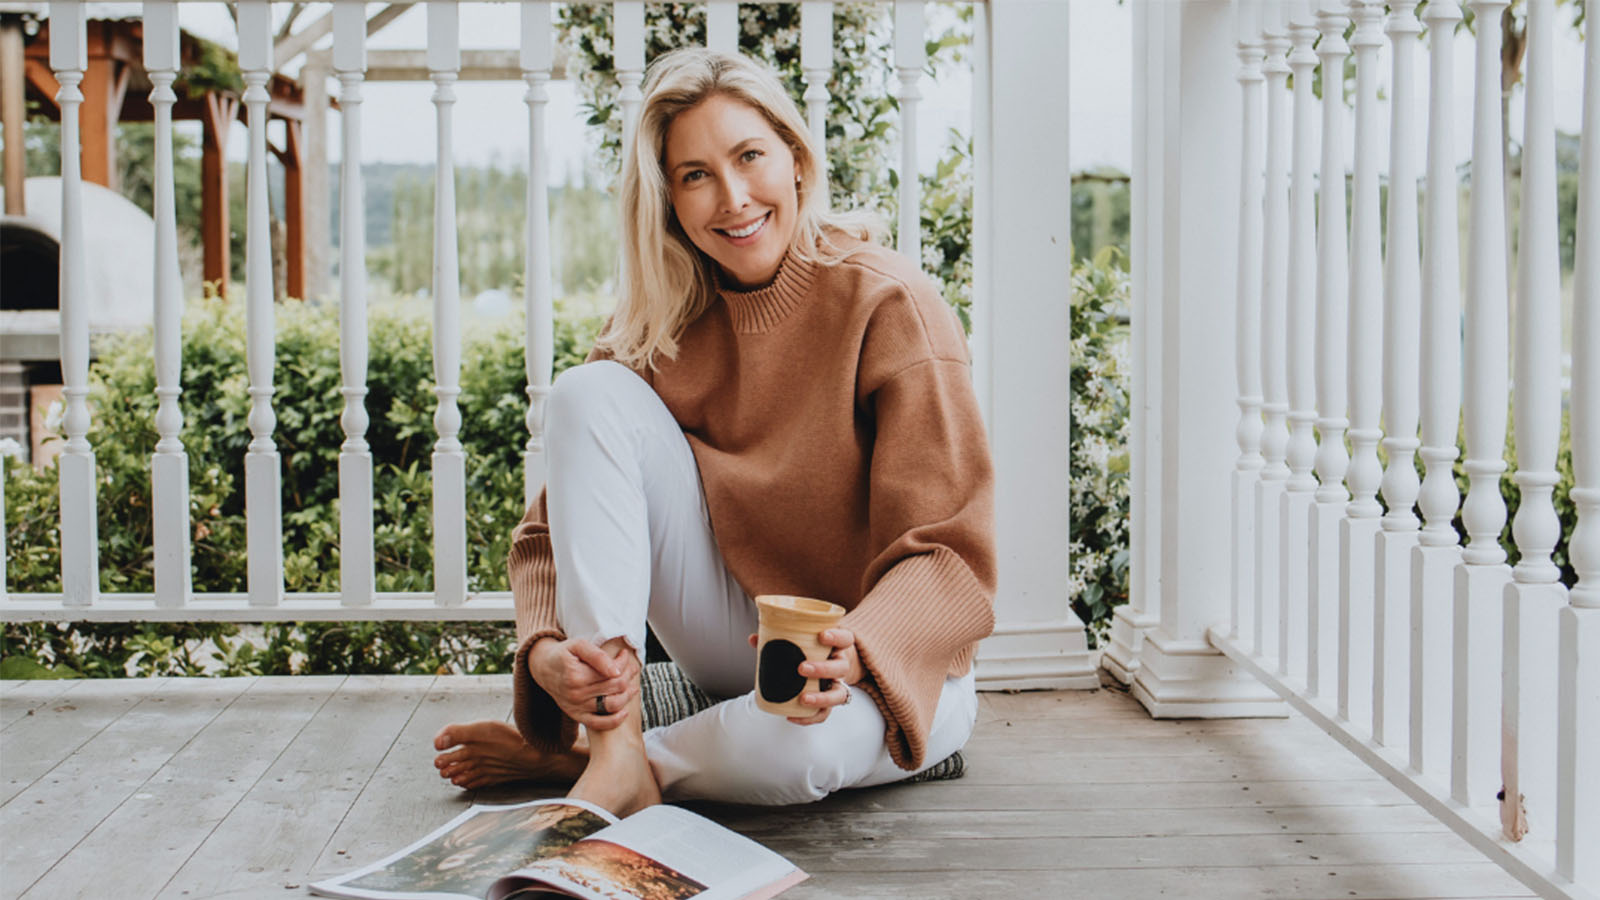 A woman with blonde hair is wearing a brown jumper and white pants. She is sitting on the floor of a verandah, smiling.